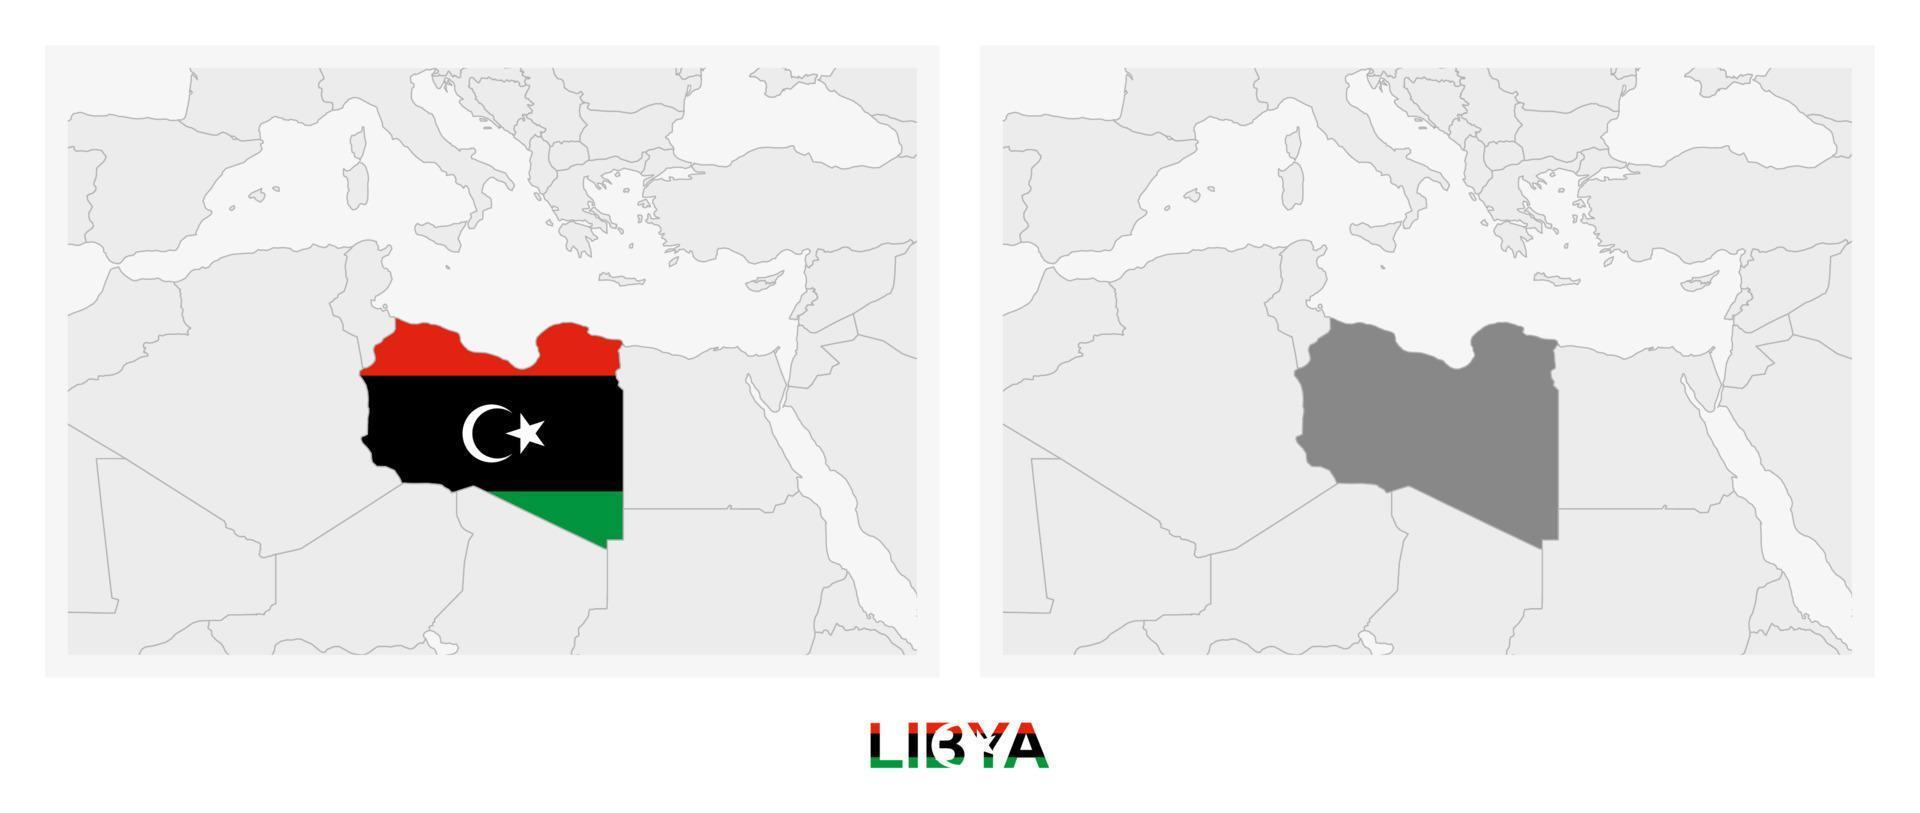 Two versions of the map of Libya, with the flag of Libya and highlighted in dark grey. vector